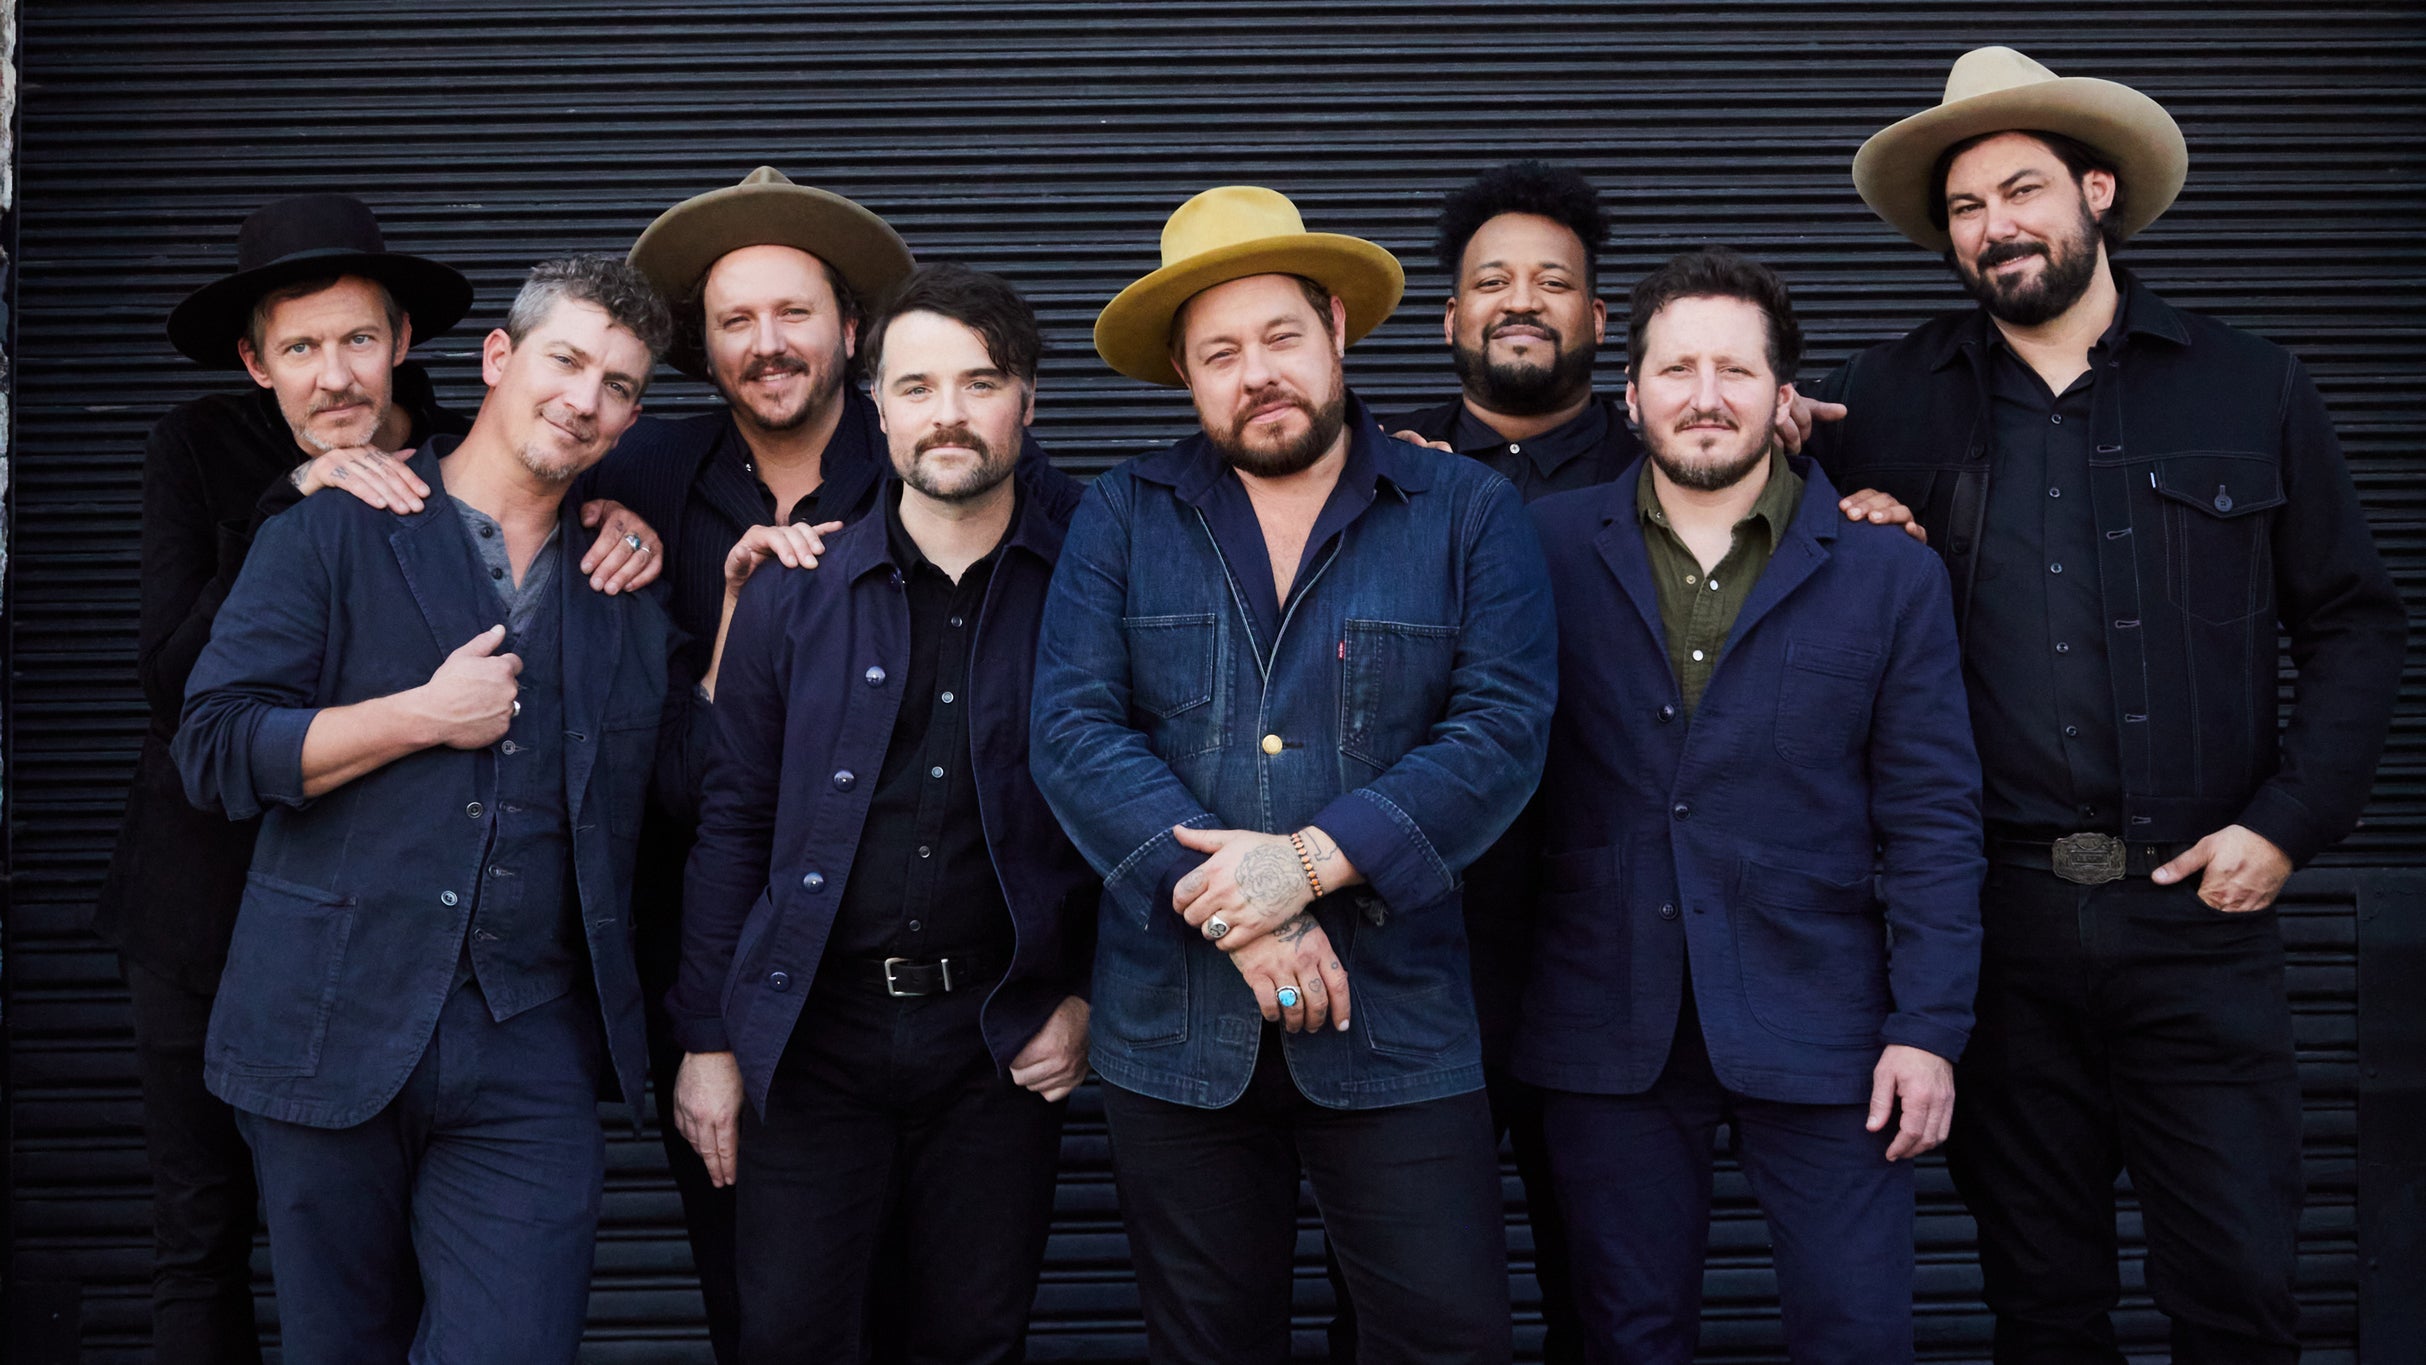 Eye To Eye Tour - Nathaniel Rateliff & TNS and My Morning Jacket presale password for event tickets in Jacksonville, FL (Daily's Place)